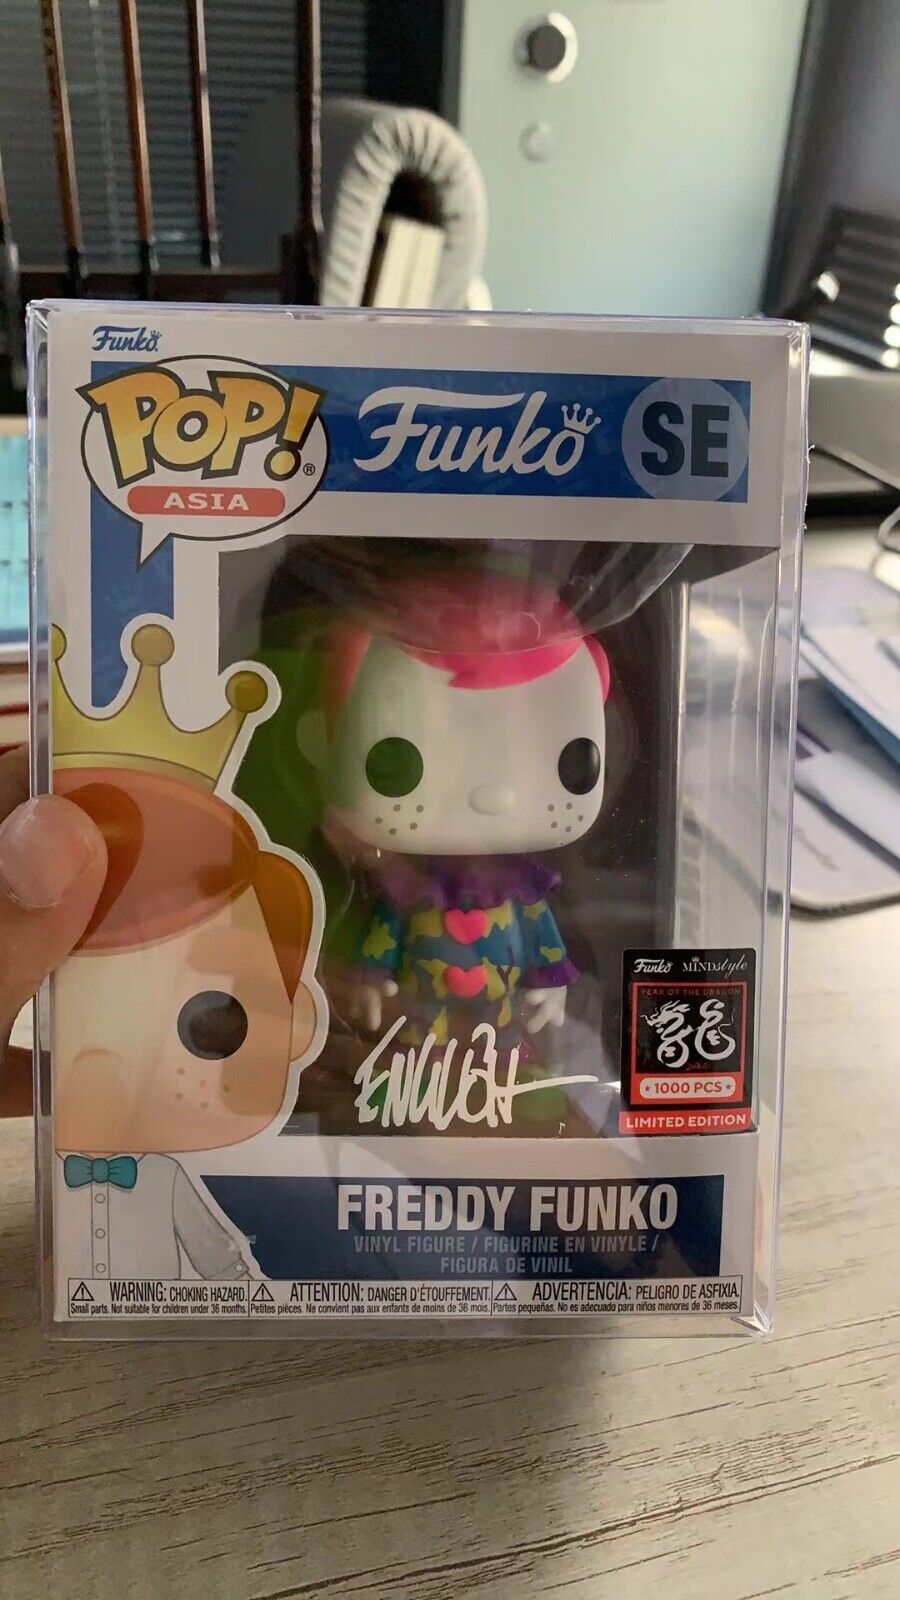 Funko pop asia exclusive  ron English signed freddy as love combrat clown toy